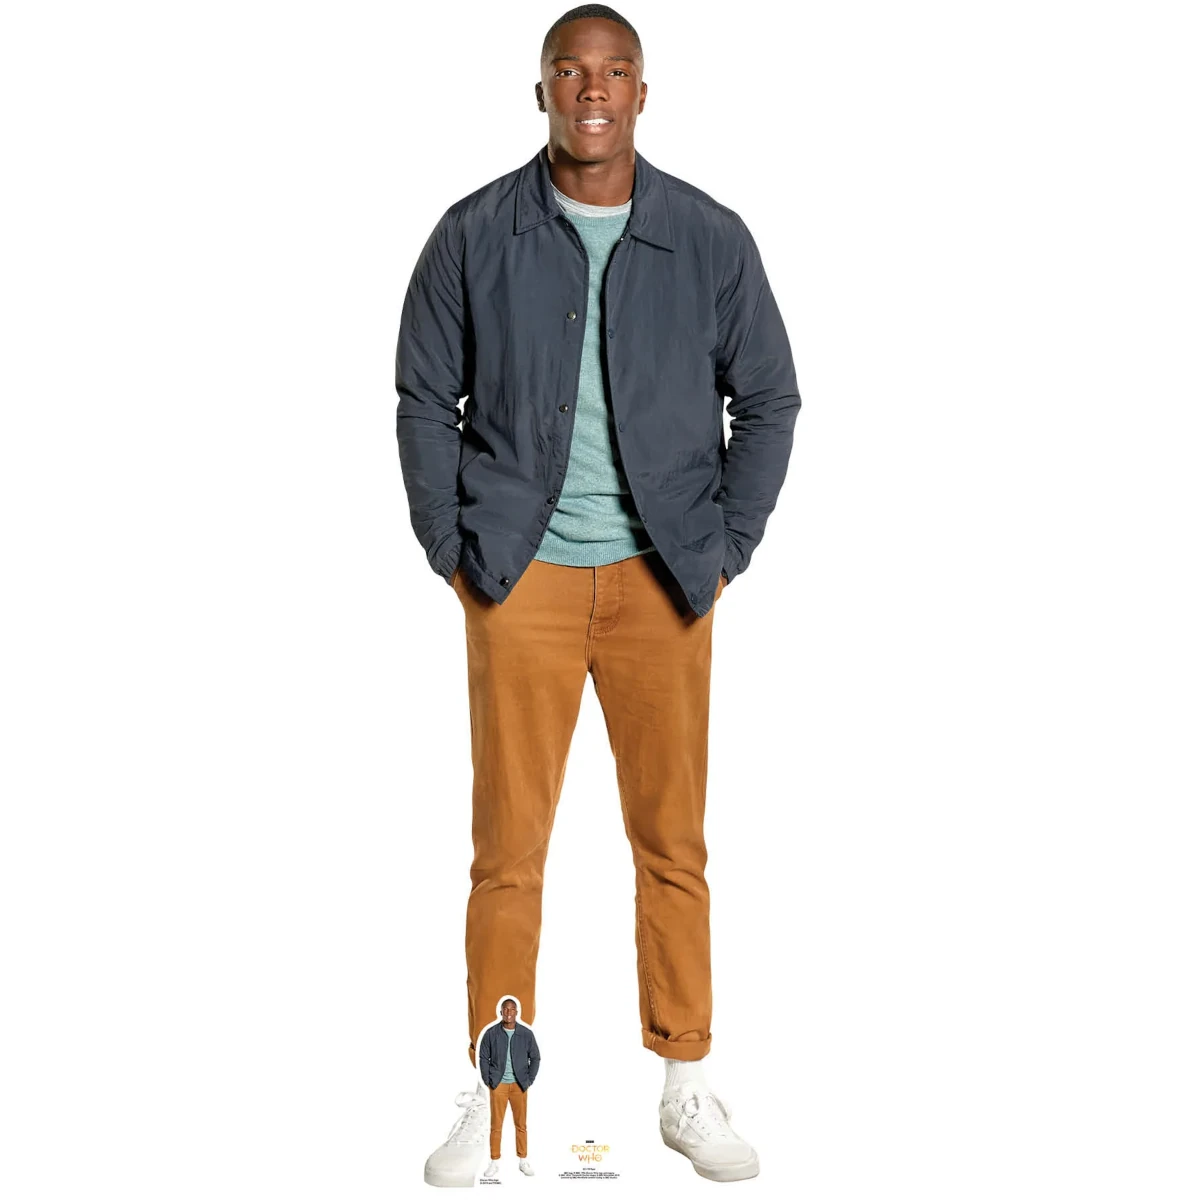 SC1199 Ryan Sinclair 'Tosin Cole' (Doctor Who) Official Lifesize + Mini Cardboard Cutout Standee Front